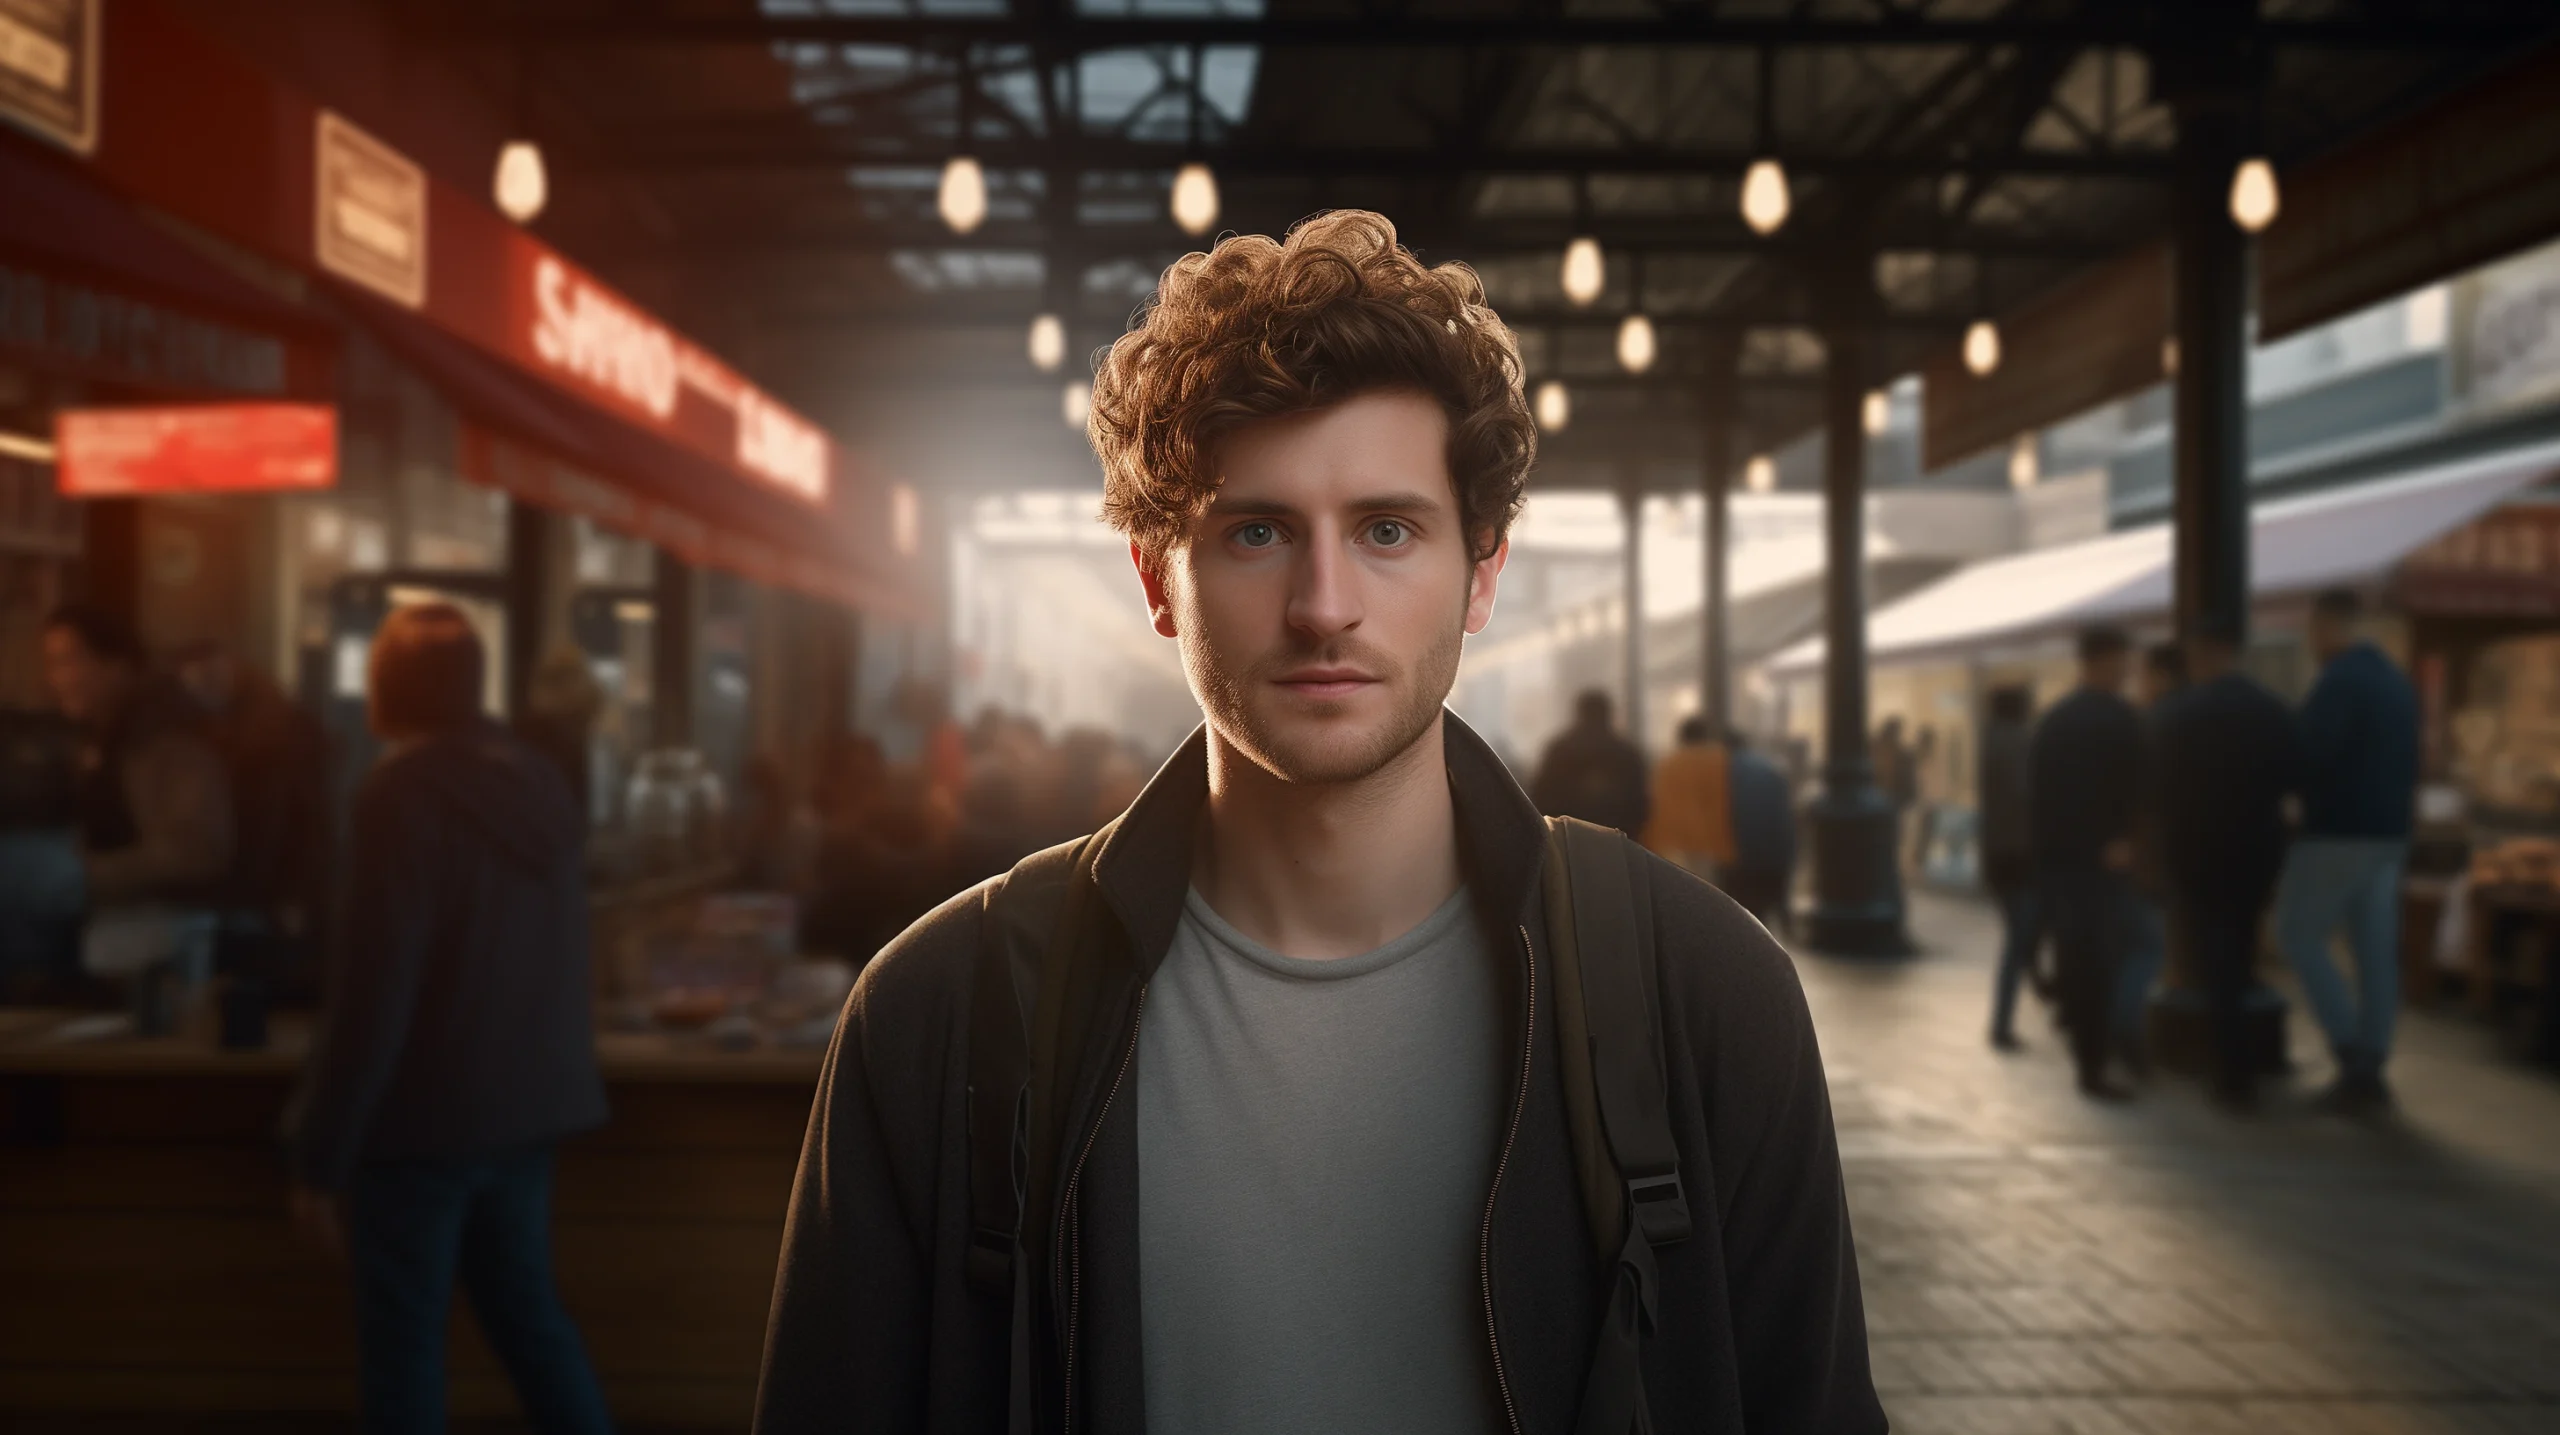 Man with curly hair stands thoughtfully in a bustling market, considering immigration options for foreign entrepreneurship.